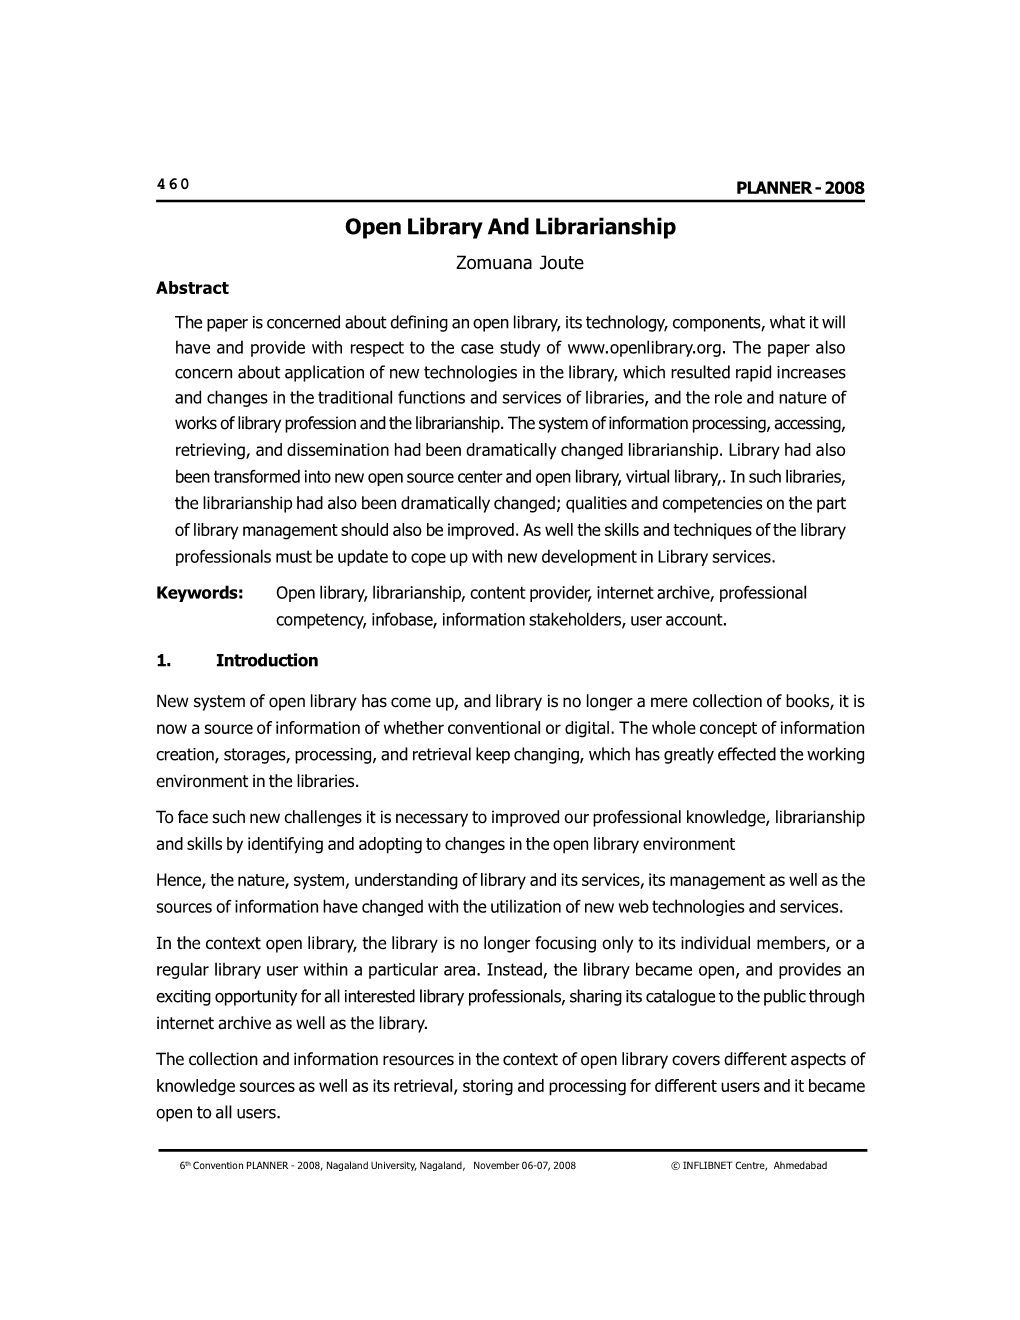 Open Library and Librarianship Zomuana Joute Abstract